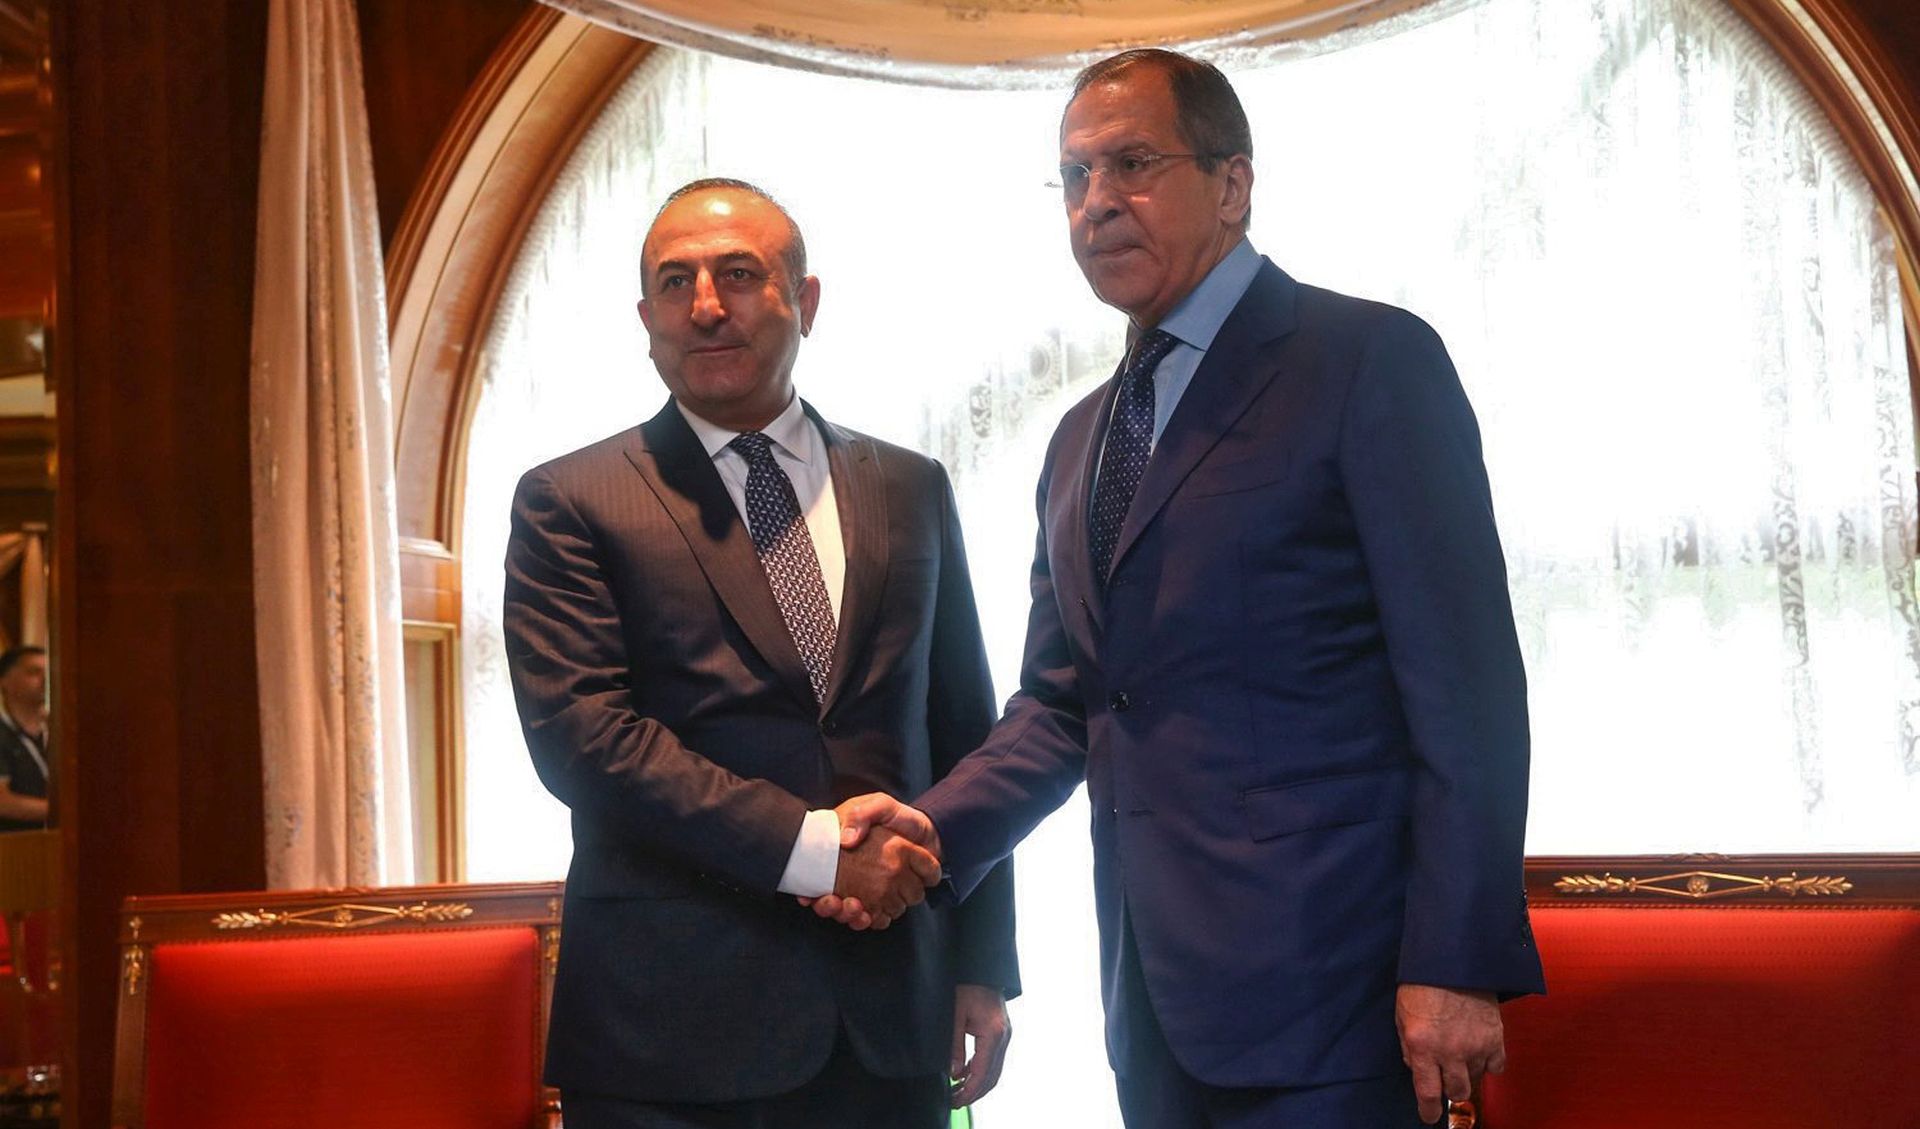 epa05401125 A handout picture released by the Russian Foreign Ministry shows Russian Foreign Minister Sergei Lavrov (R) meeting with Turkish Foreign Minister Mevlut Cavusoglu (L) in Sochi, Russia, 01 July 2016. The Russian and Turkish  ministers met to promote the process of normalization of Russian-Turkish relations. Sochi hosts a meeting of the Organization of the Black Sea Economic Cooperation (BSEC) Council of Foreign Affairs Ministers on July 01, 2016.  EPA/RUSSIAN FOREIGN AFFAIRS MINISTRY PRESS SERVICE / HANDOUT BEST QUALITY AVAILABLE HANDOUT EDITORIAL USE ONLY/NO SALES